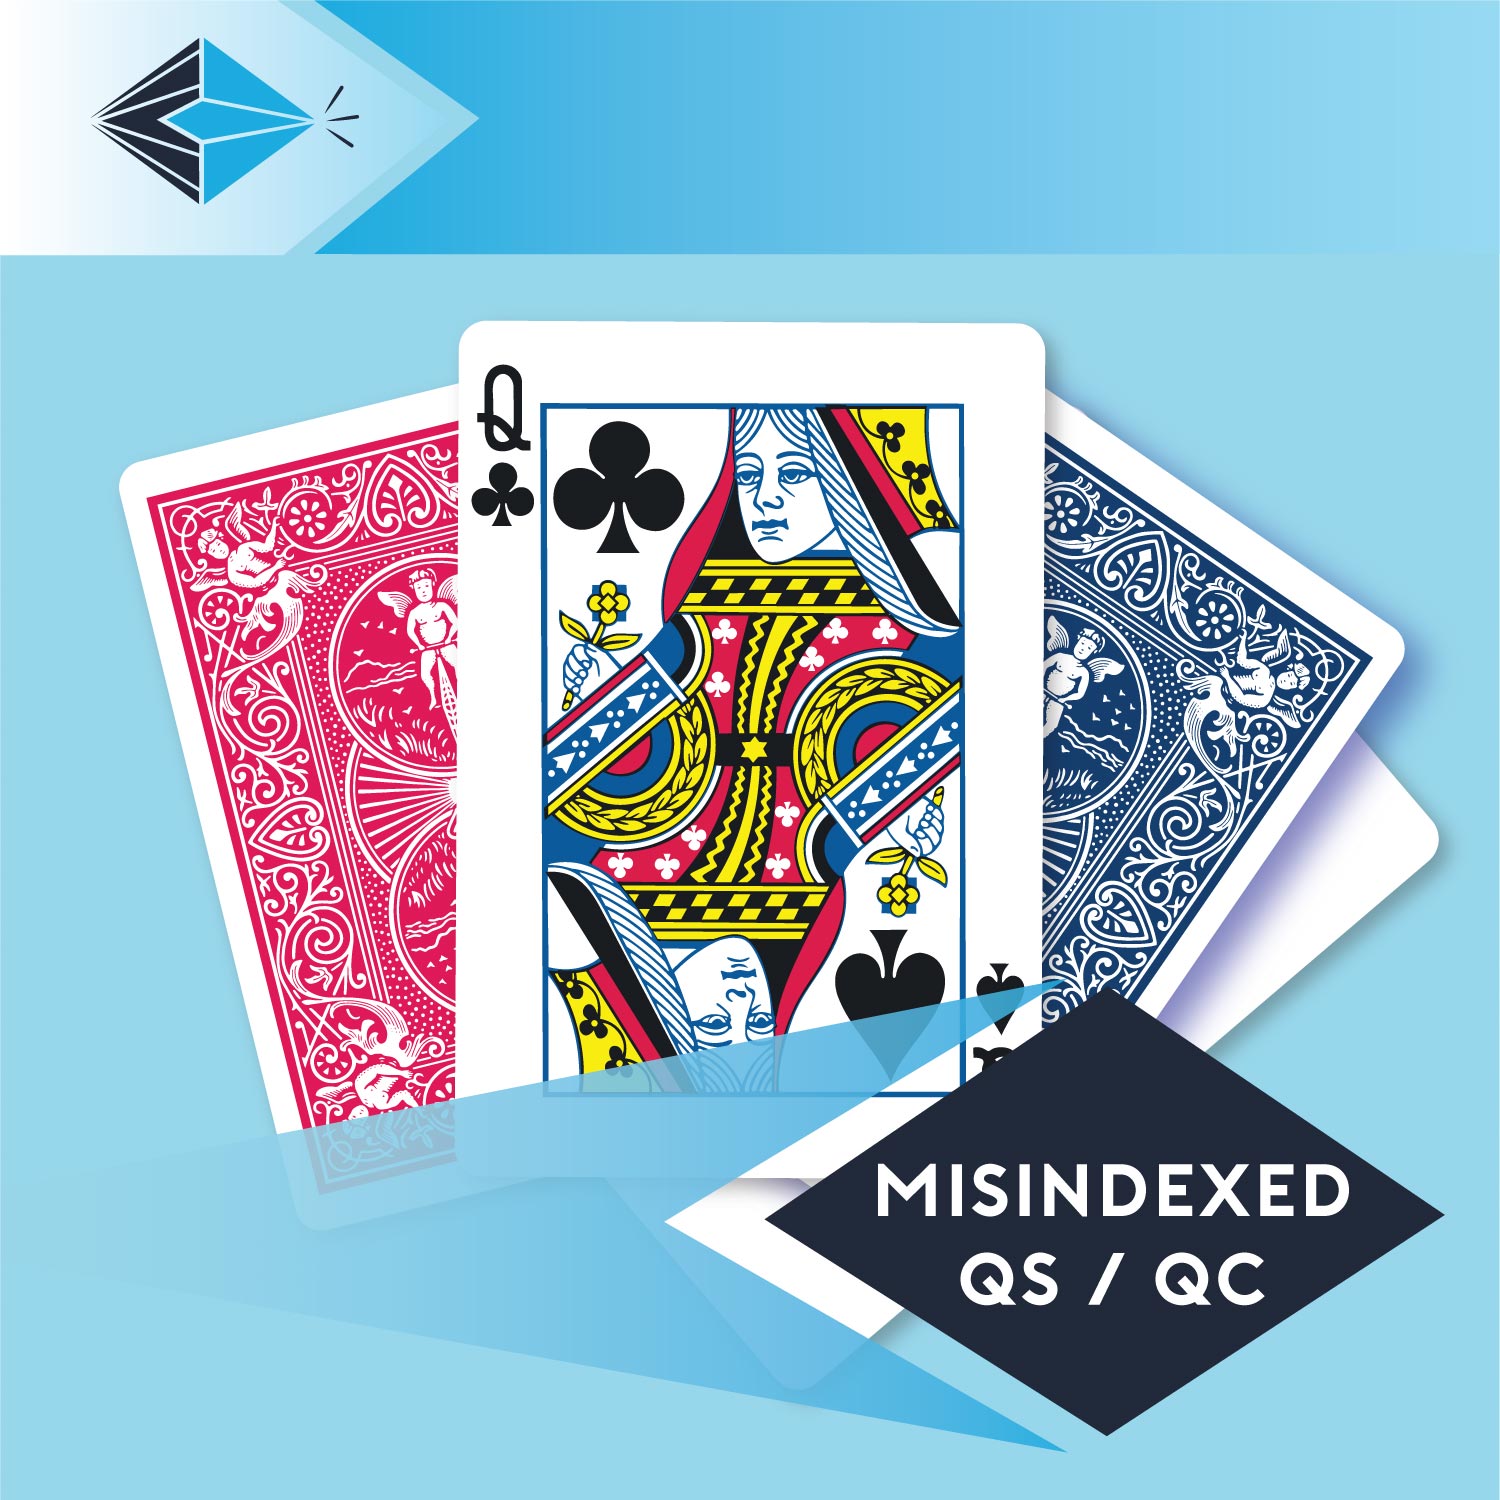 mis-indexed-queen-spades-clubs-qs-qc-playing card for magicians printing printers Stockport Manchester UK